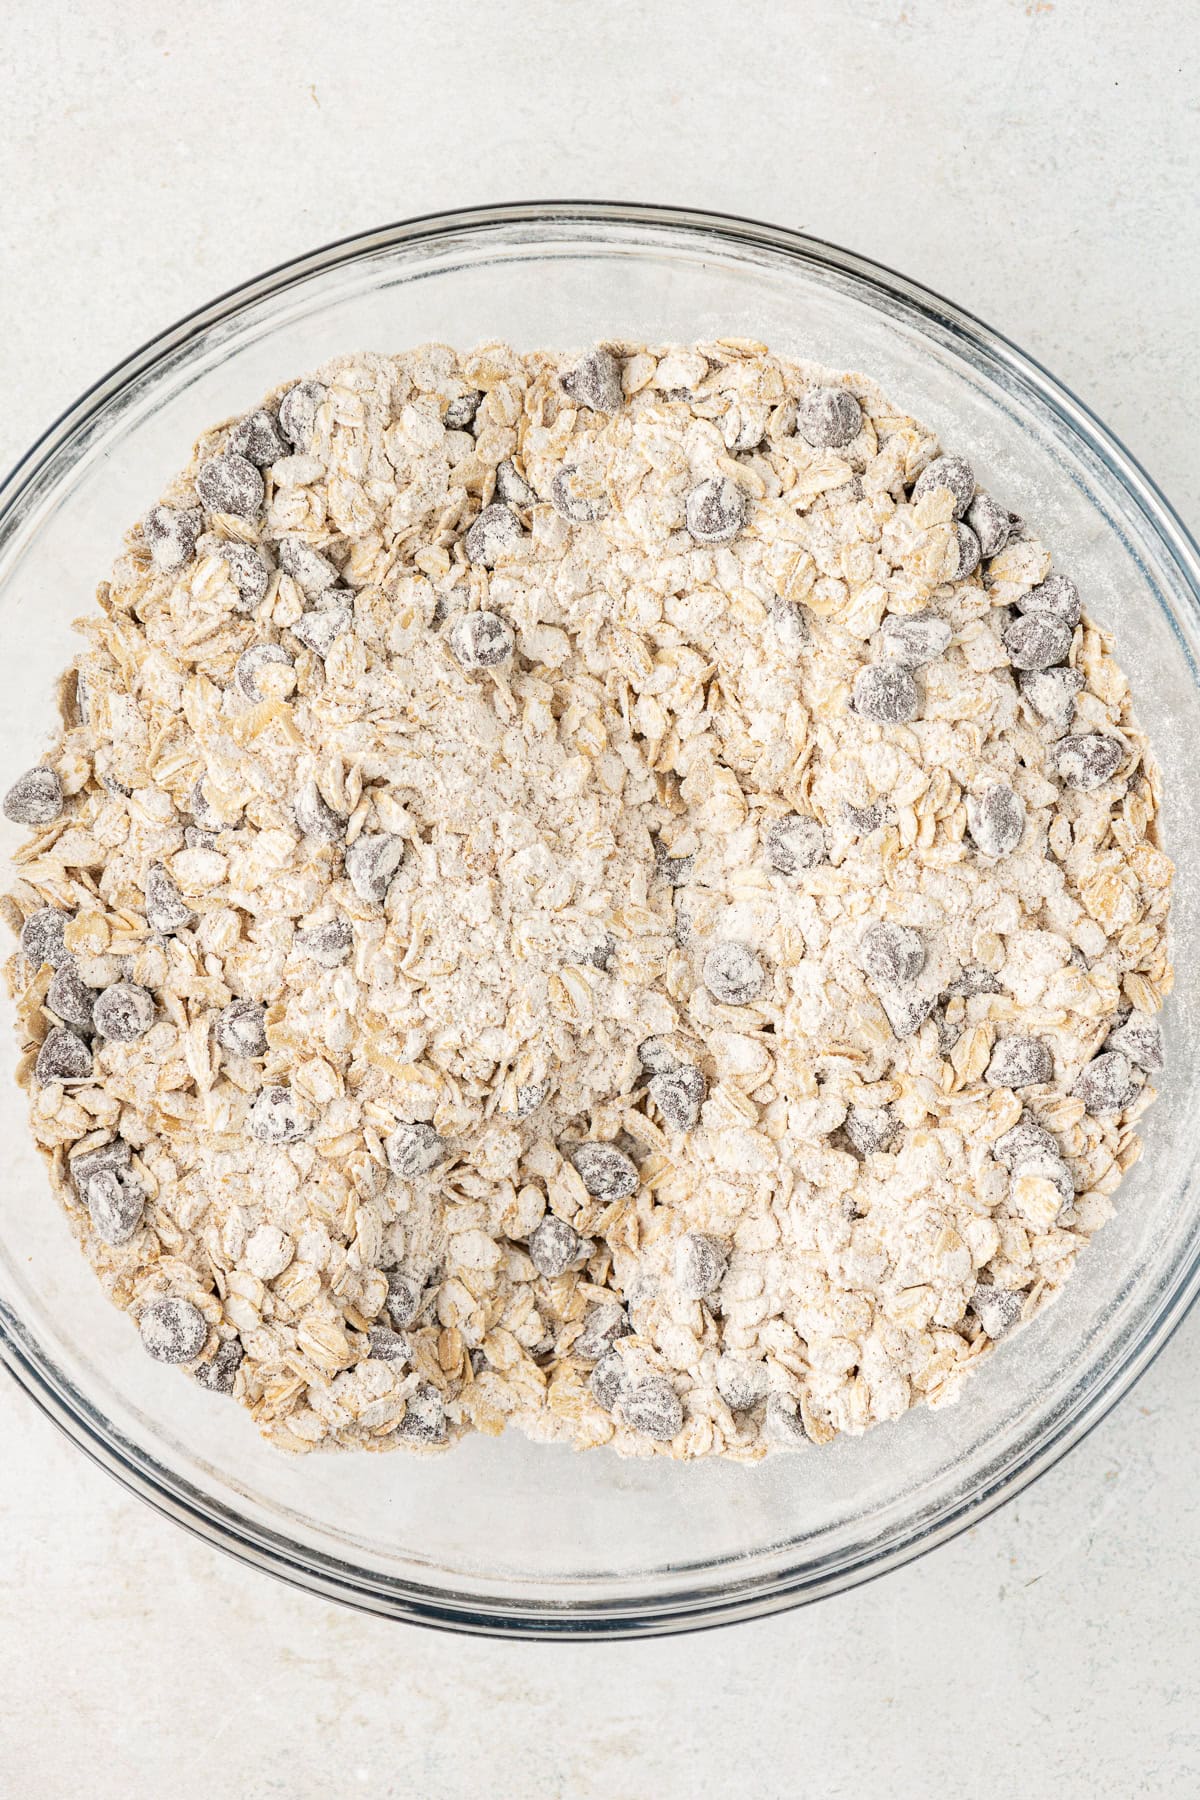 oats, flour mixture and chocolate chips mixed in a clear glass bowl